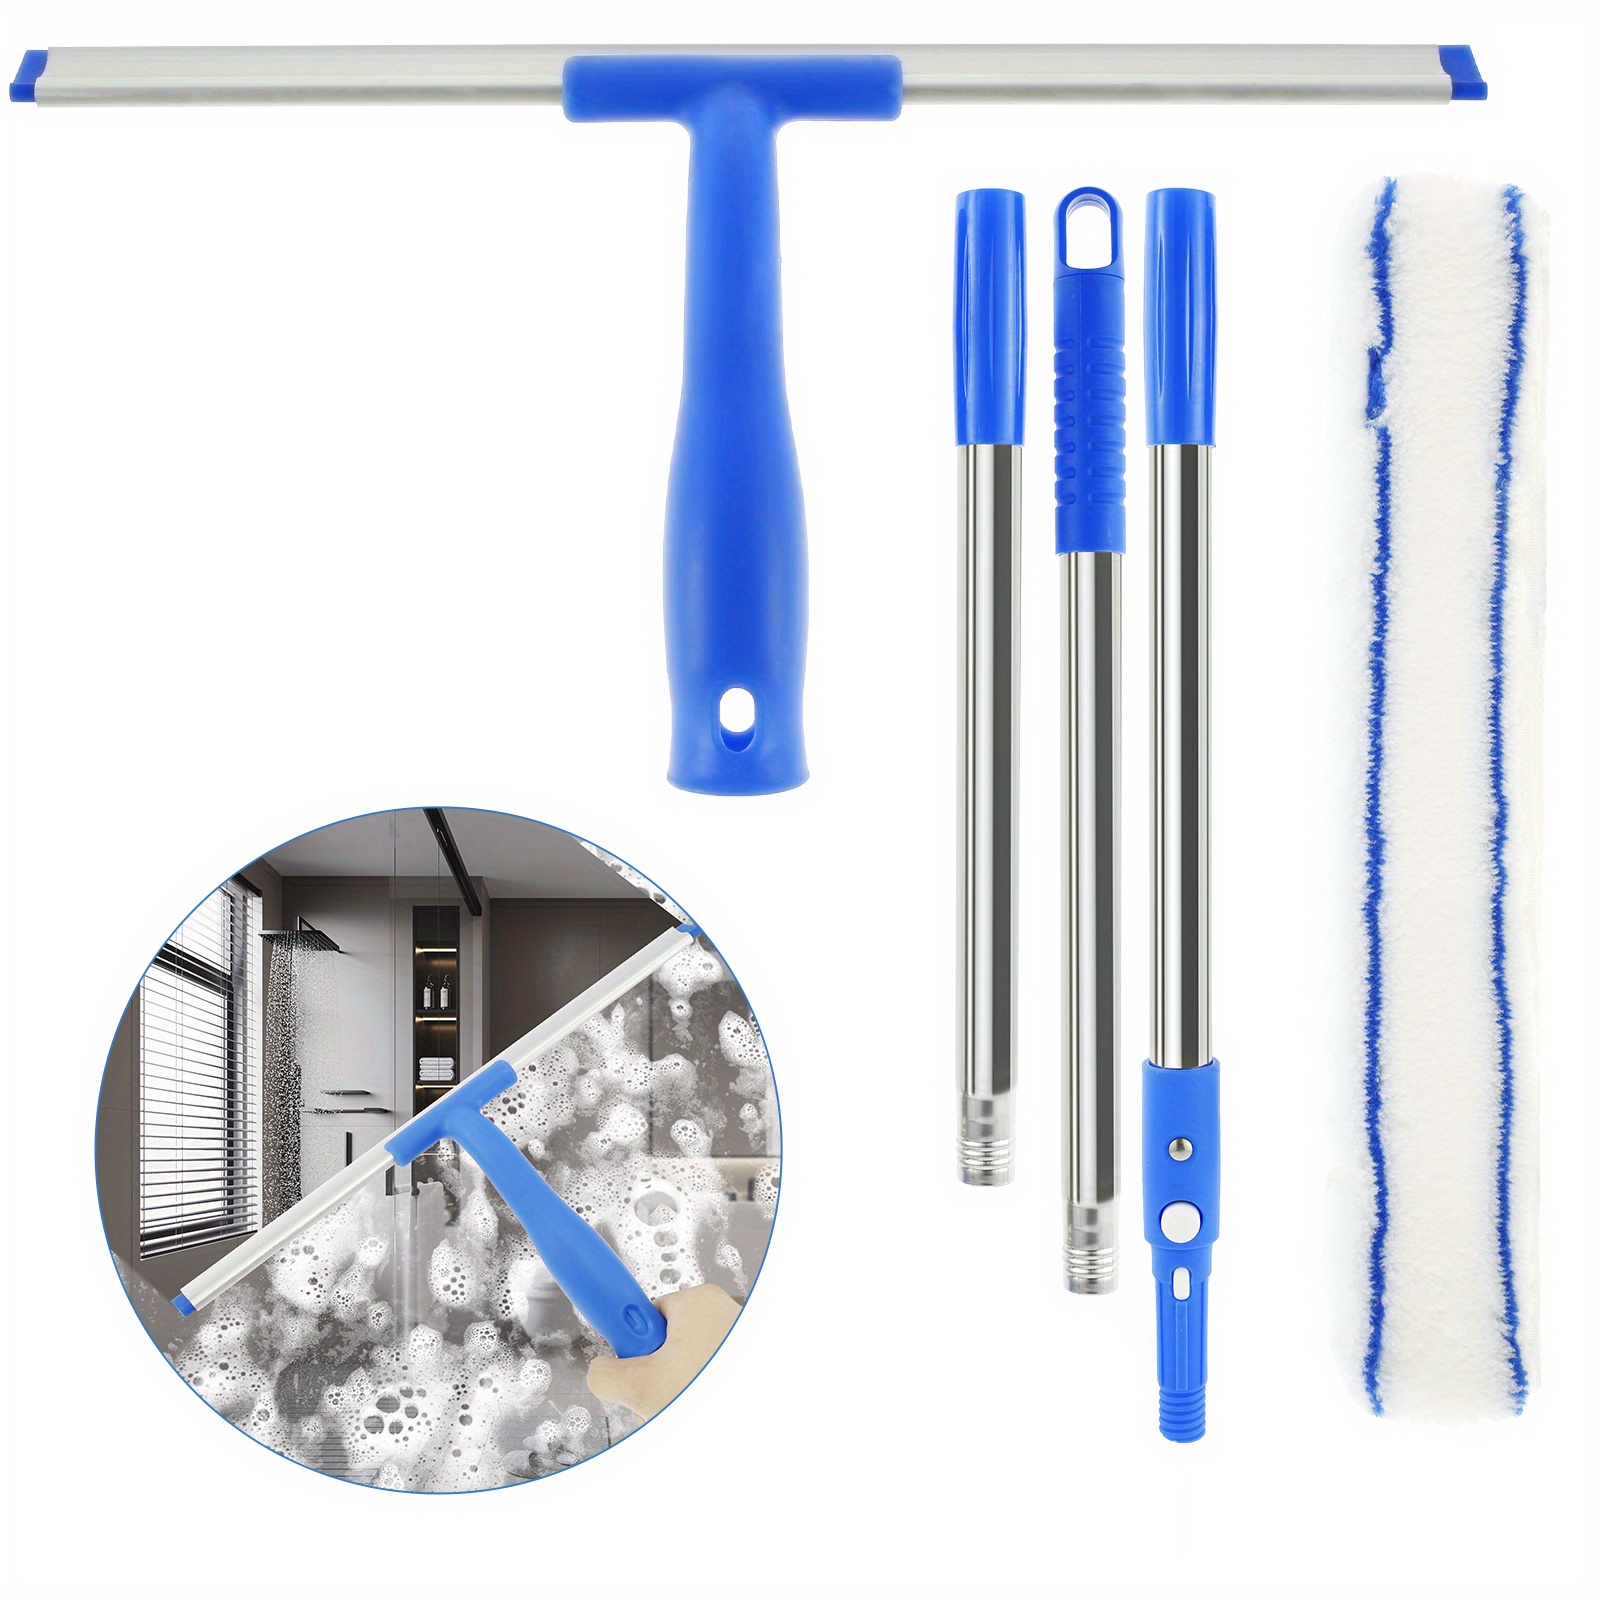 

Professional Window Cleaning Kit With Adjustable 53" Stainless Steel Pole - Includes Durable Rubber Squeegee & Scrubber For Car, Home, And Outdoor Use Window Cleaning Tools Car Cleaning Accessories